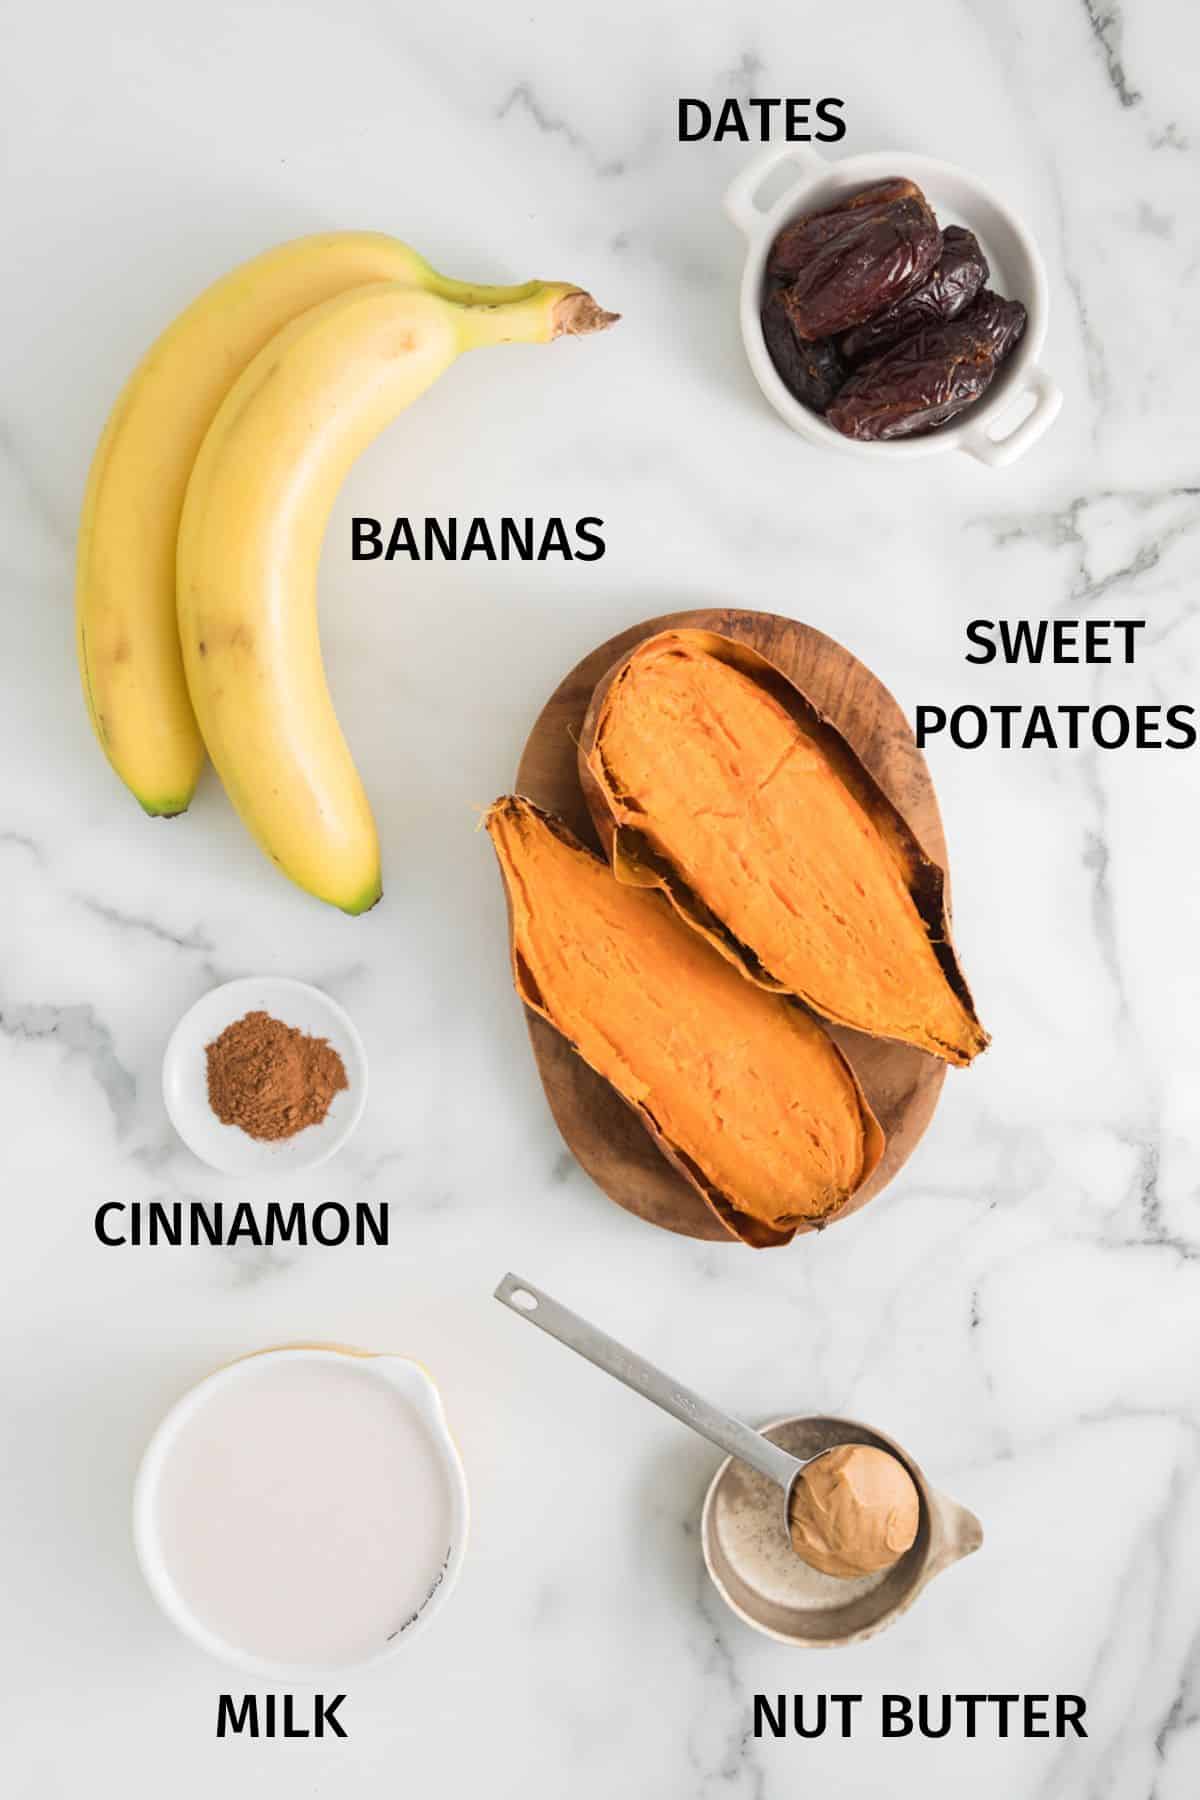 Ingredients for a sweet potato smoothie in small bowls on a white surface.